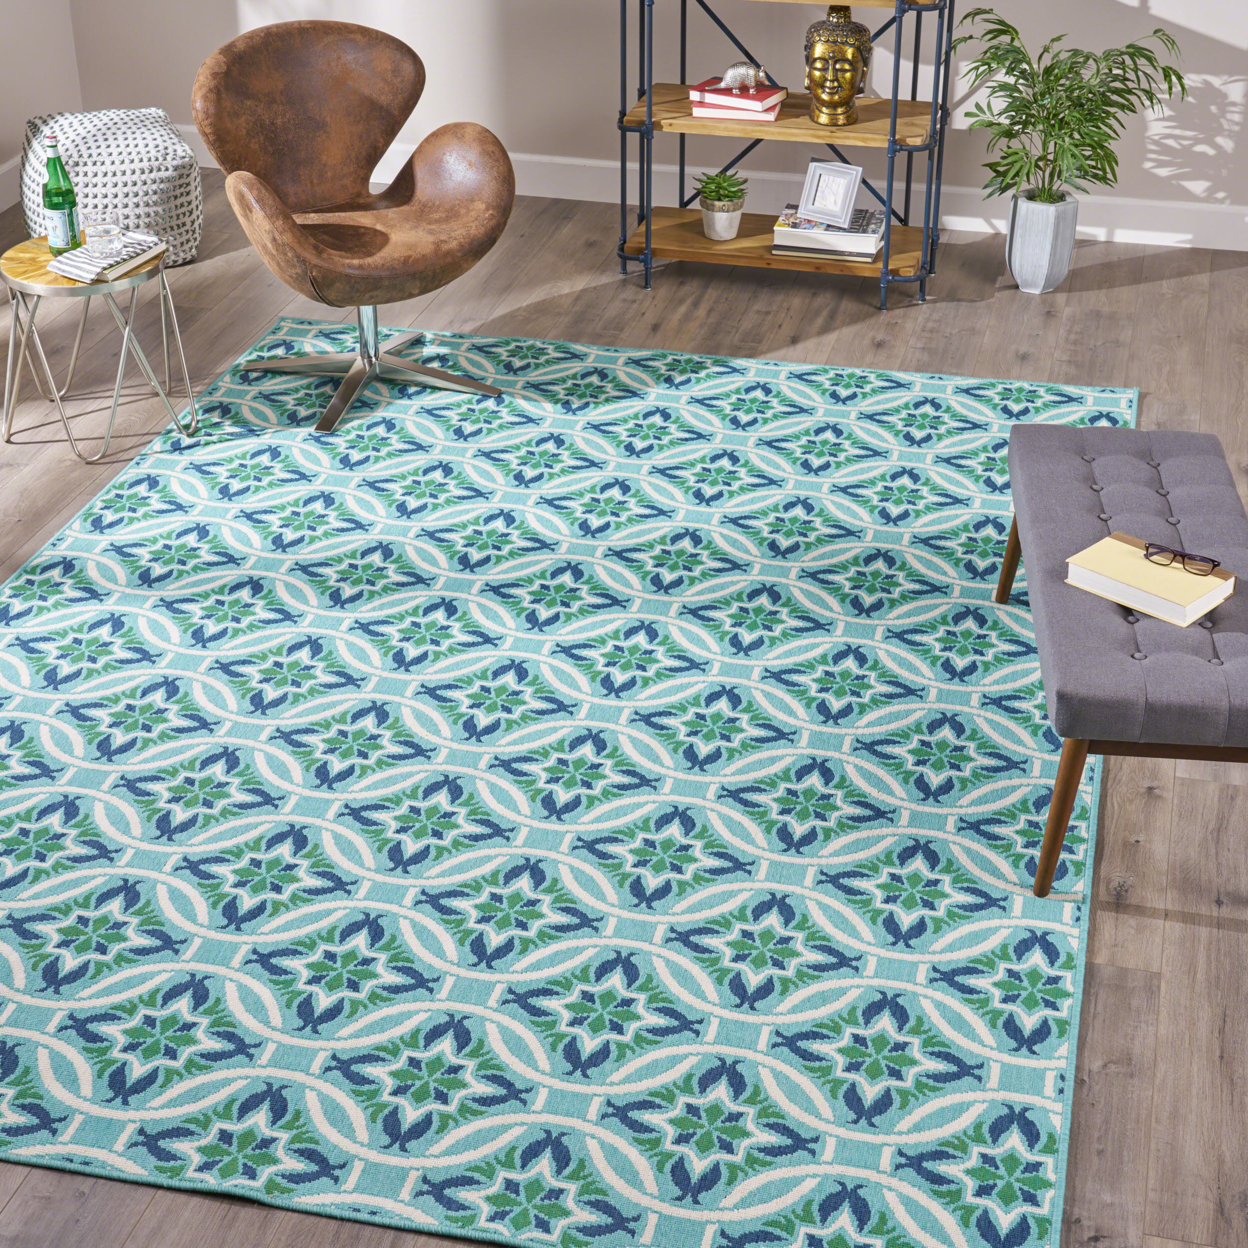 Jack Indoor Geometric Area Rug, Blue And Green - Blue + Green, 5' X 8'